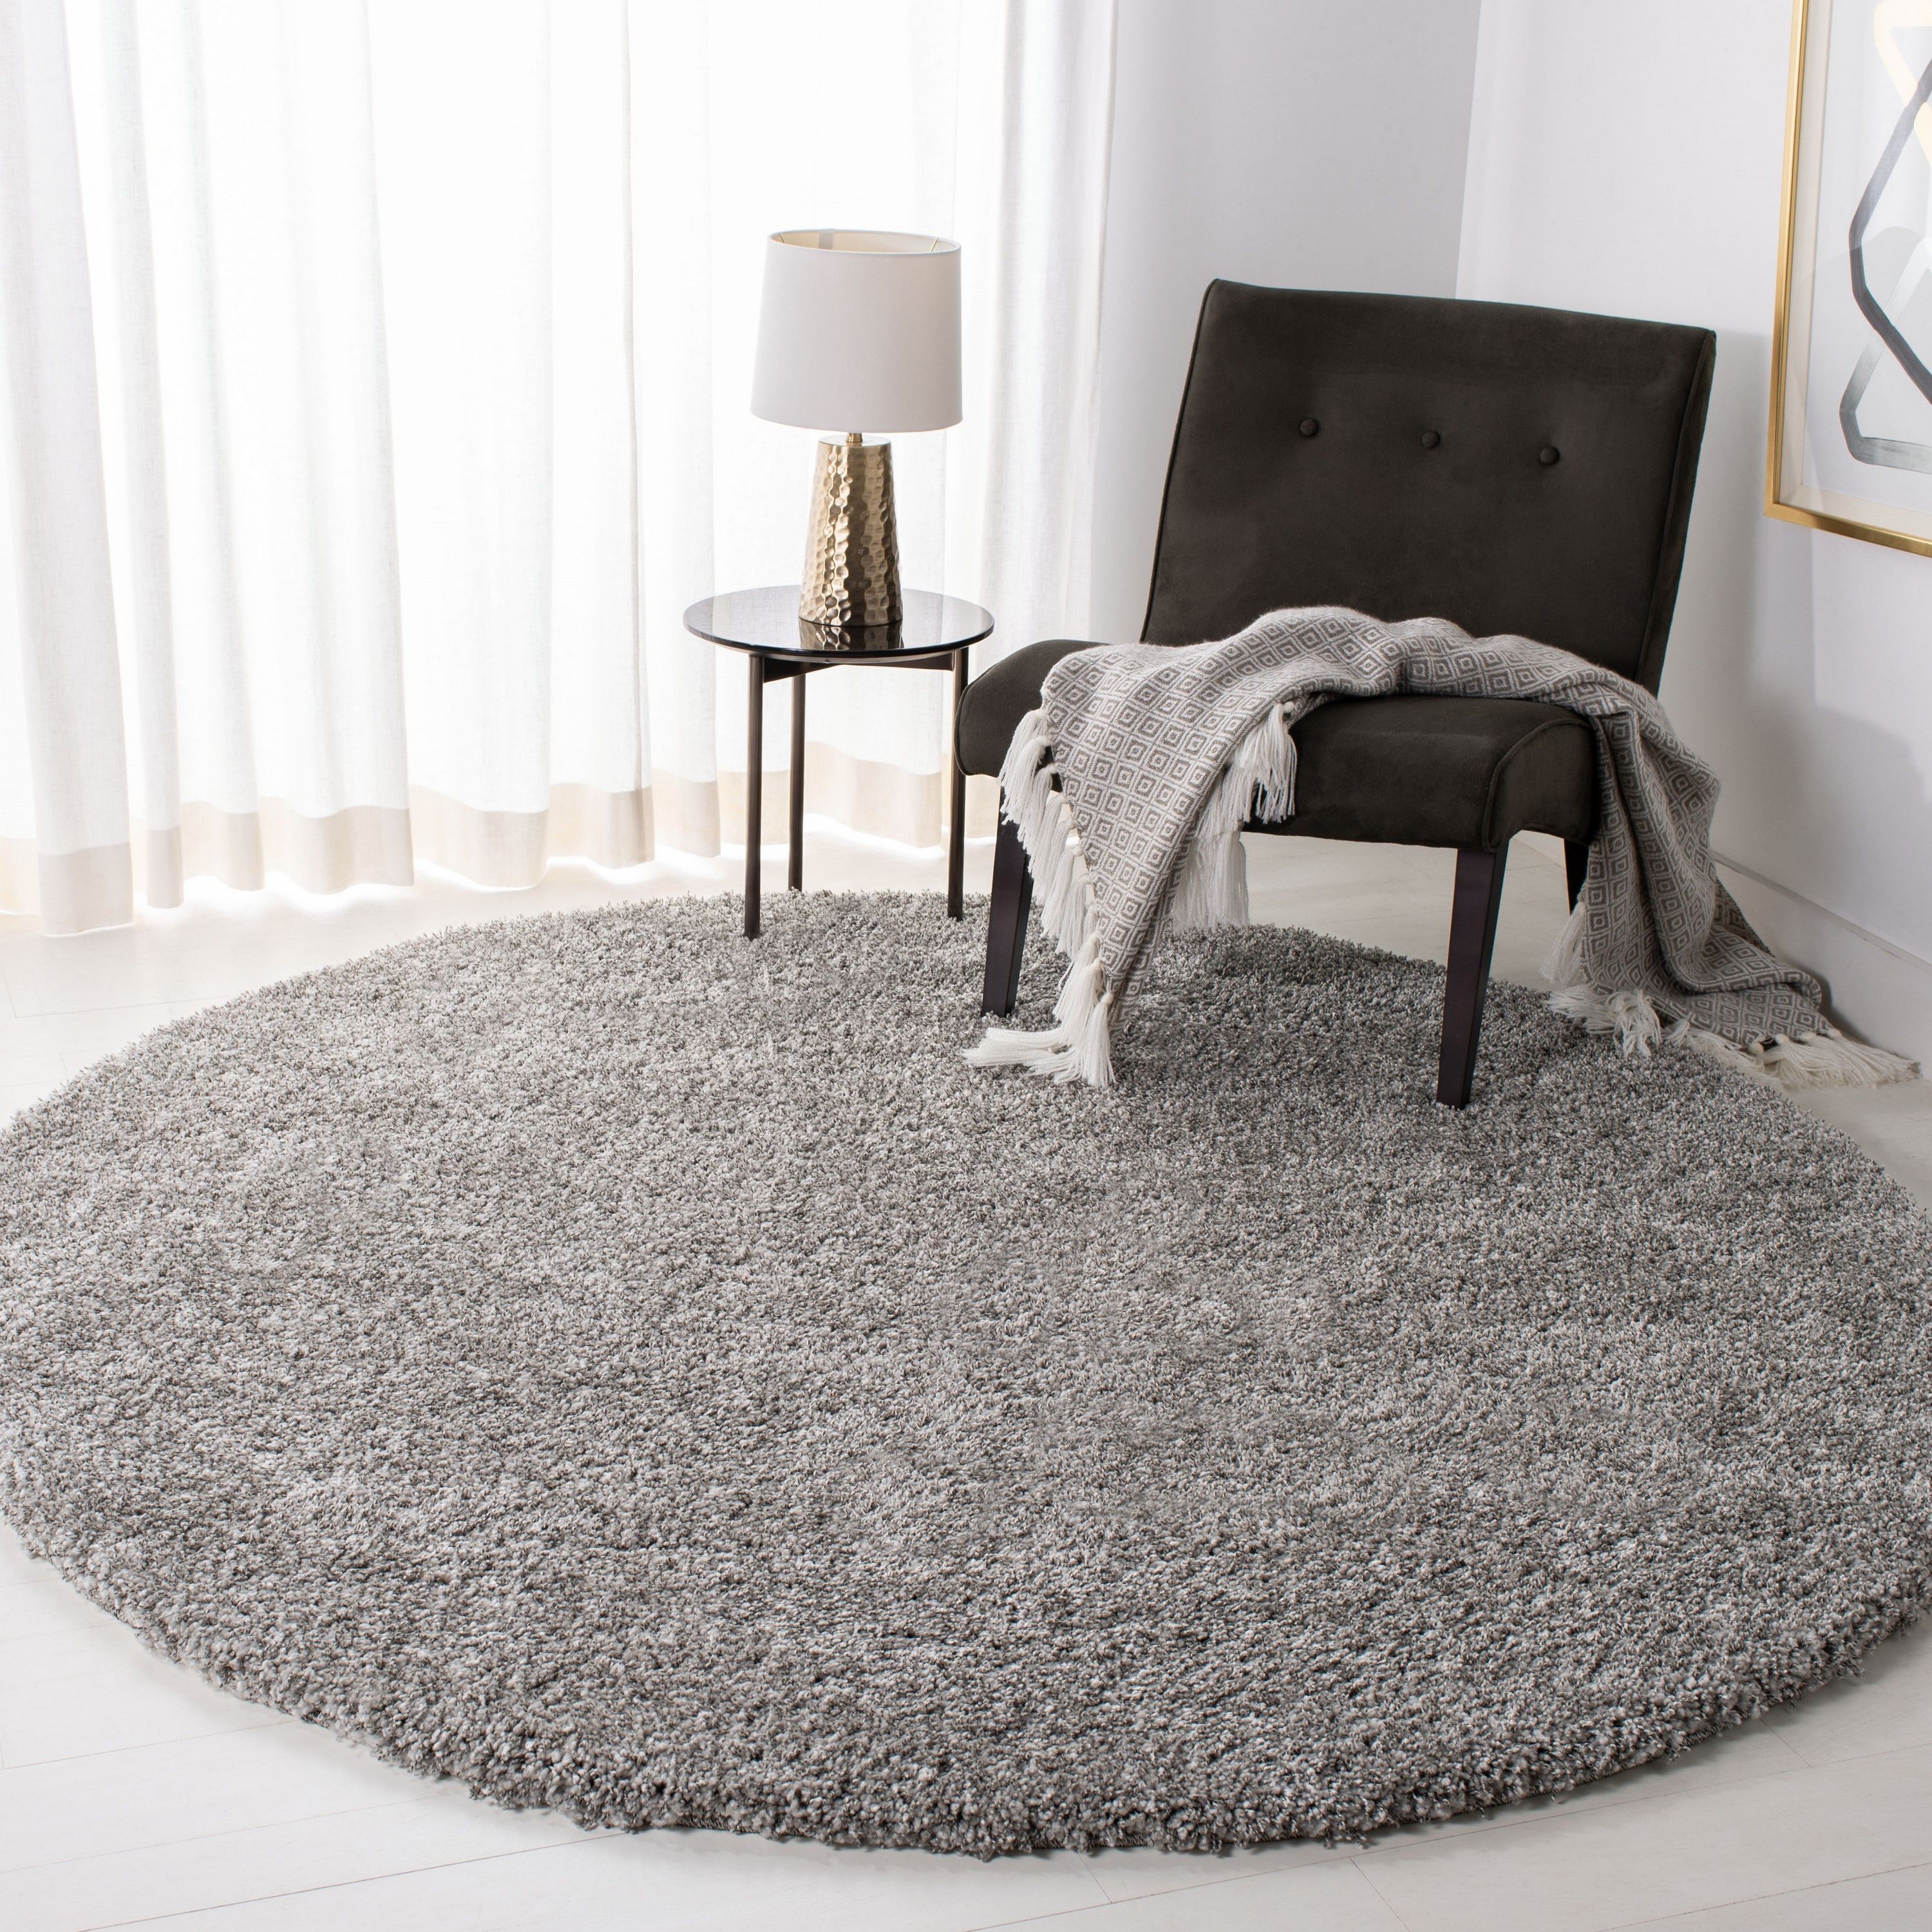 Safavieh 4 X 4 Frieze Silver Round Indoor Solid Area Rug At Lowes With Regard To Solid Shag Round Rugs (View 7 of 15)